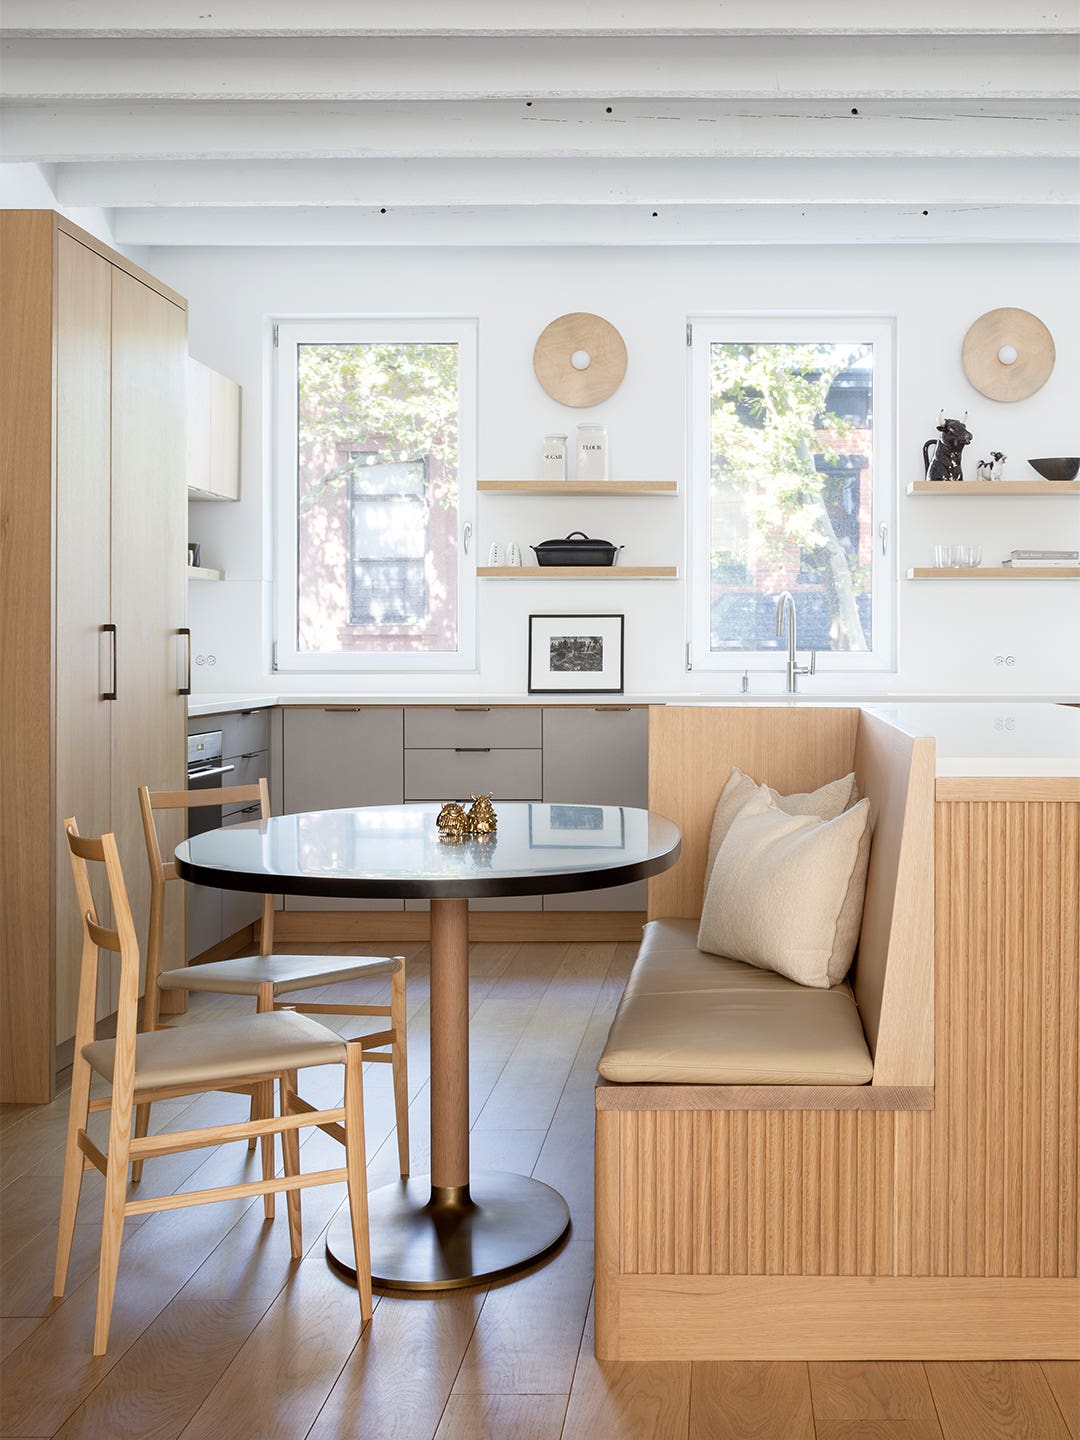 Meet the Sweet Spot Between a Formal Dining Table and a Breakfast Bar